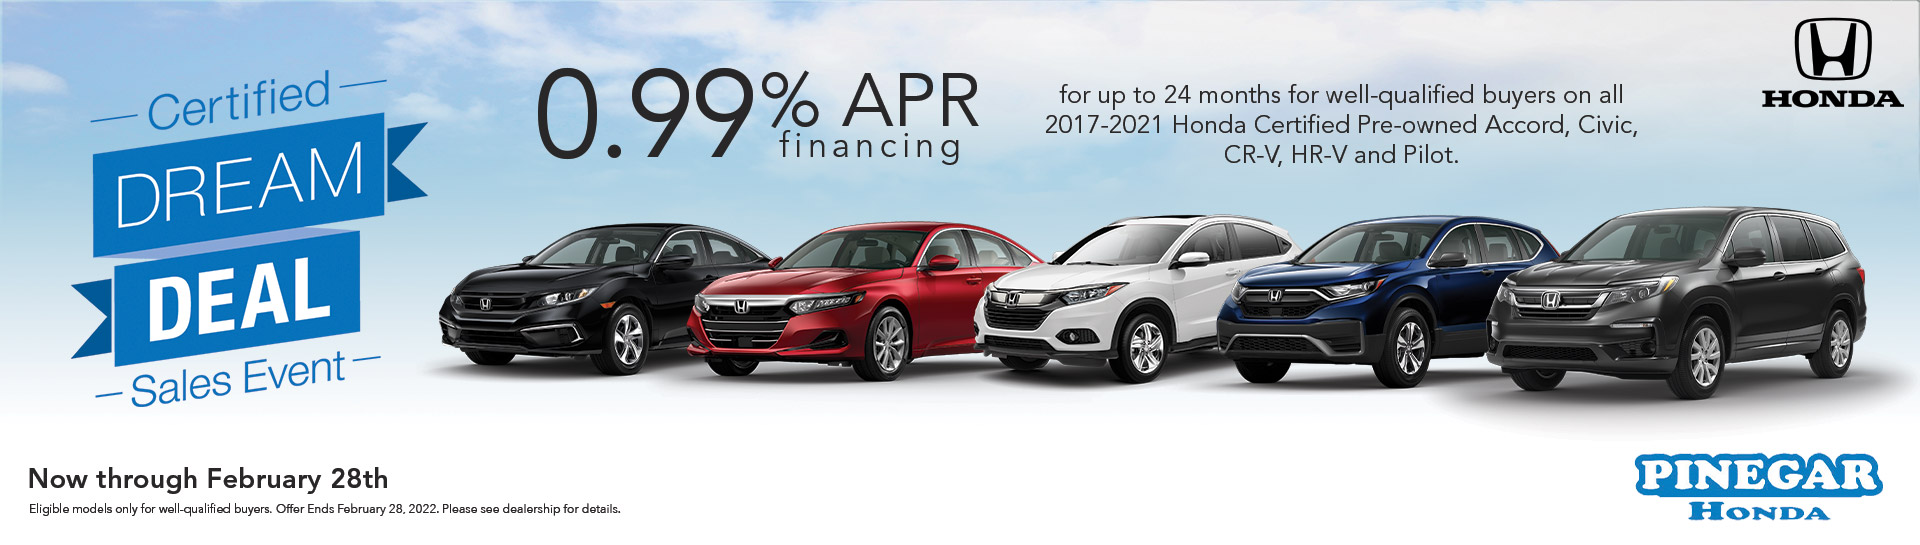 Certified Dream Deal Sales Event - now through February 28th